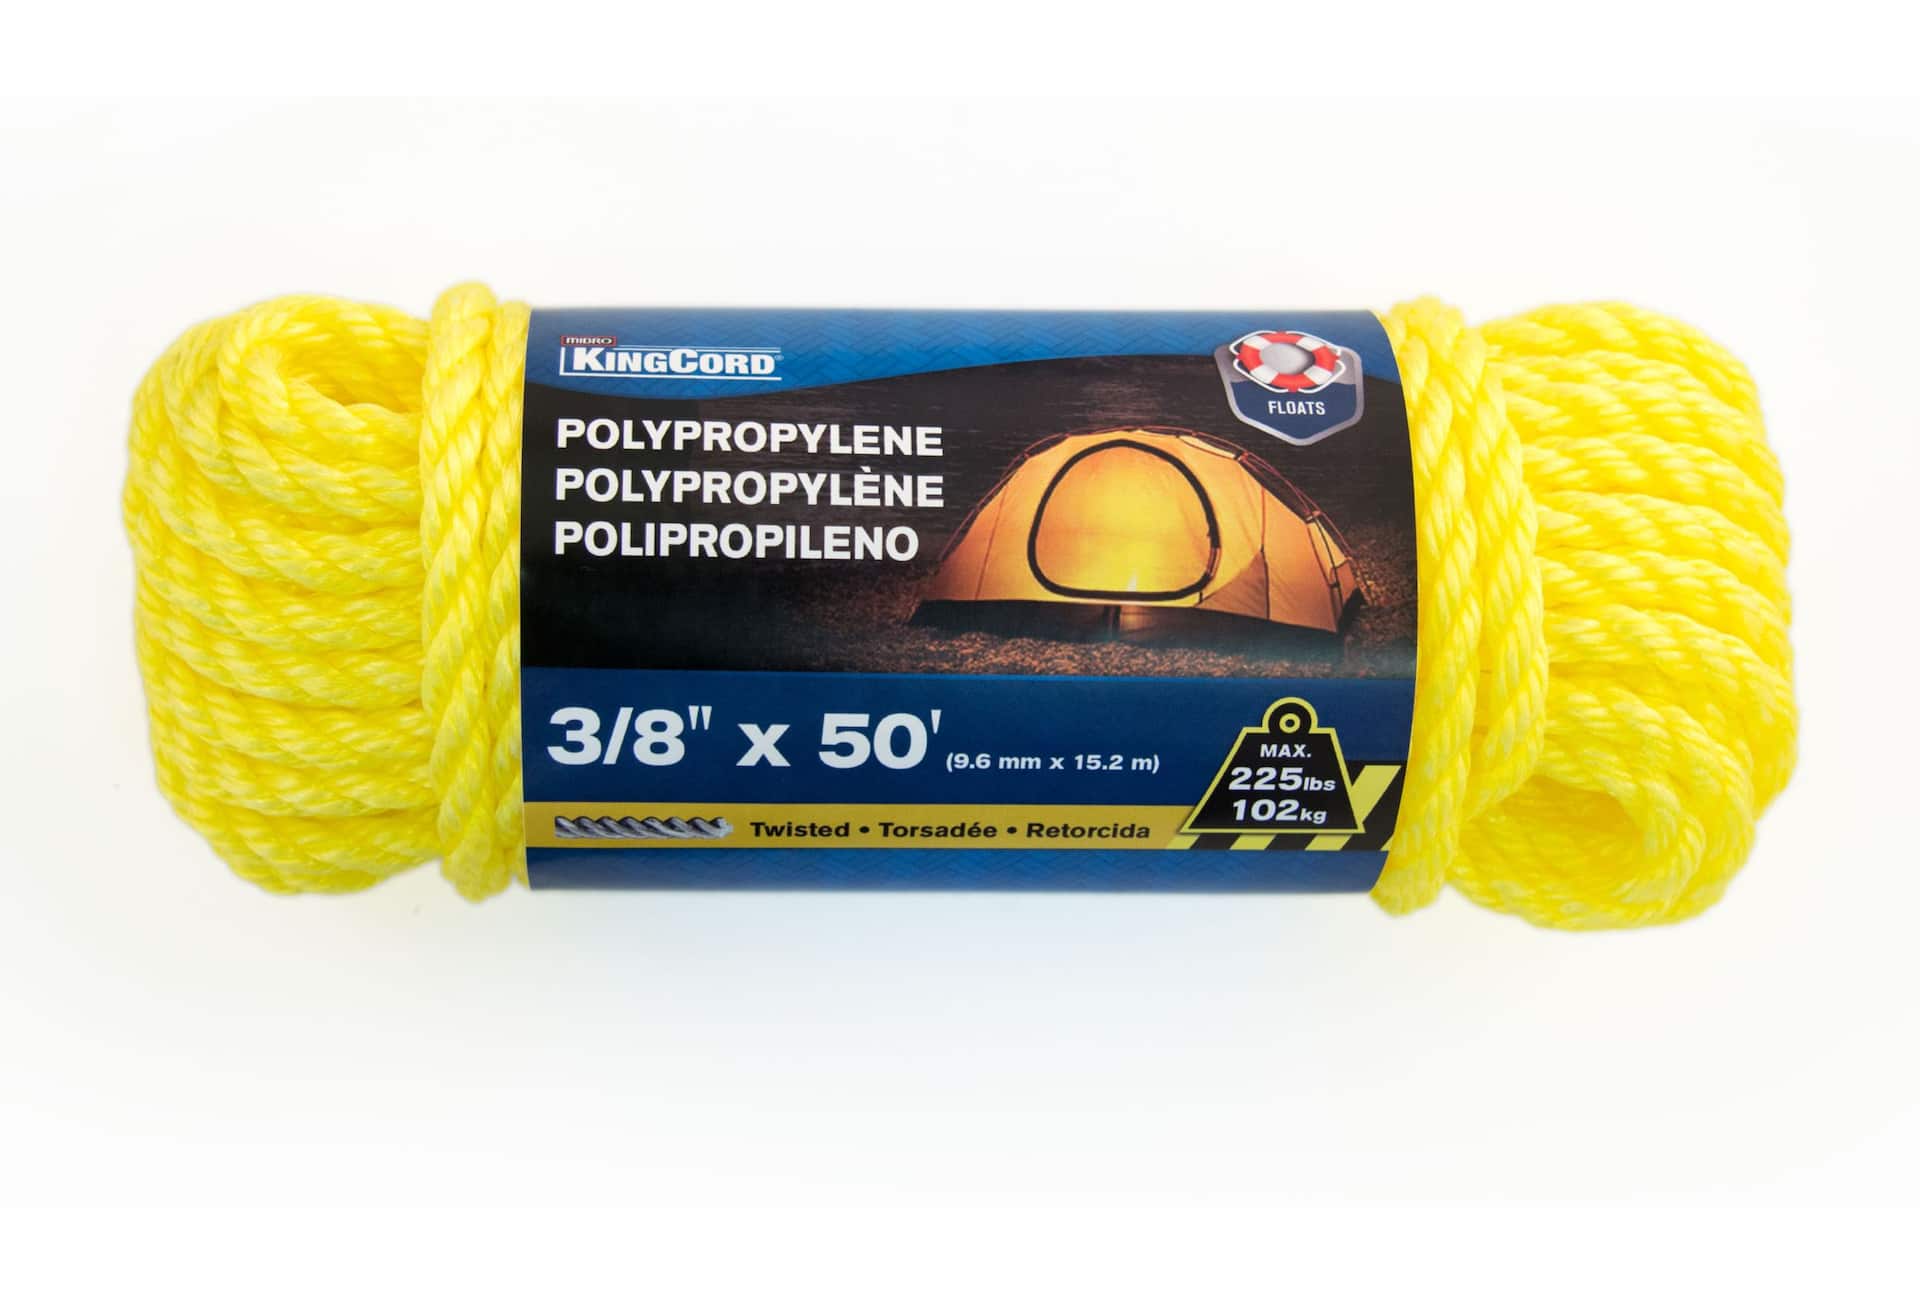 https://media-www.canadiantire.ca/product/fixing/hardware/general-hardware/0618528/rope-poly-3-8-x-50--934b2afc-531b-4443-907e-c70812759d3b-jpgrendition.jpg